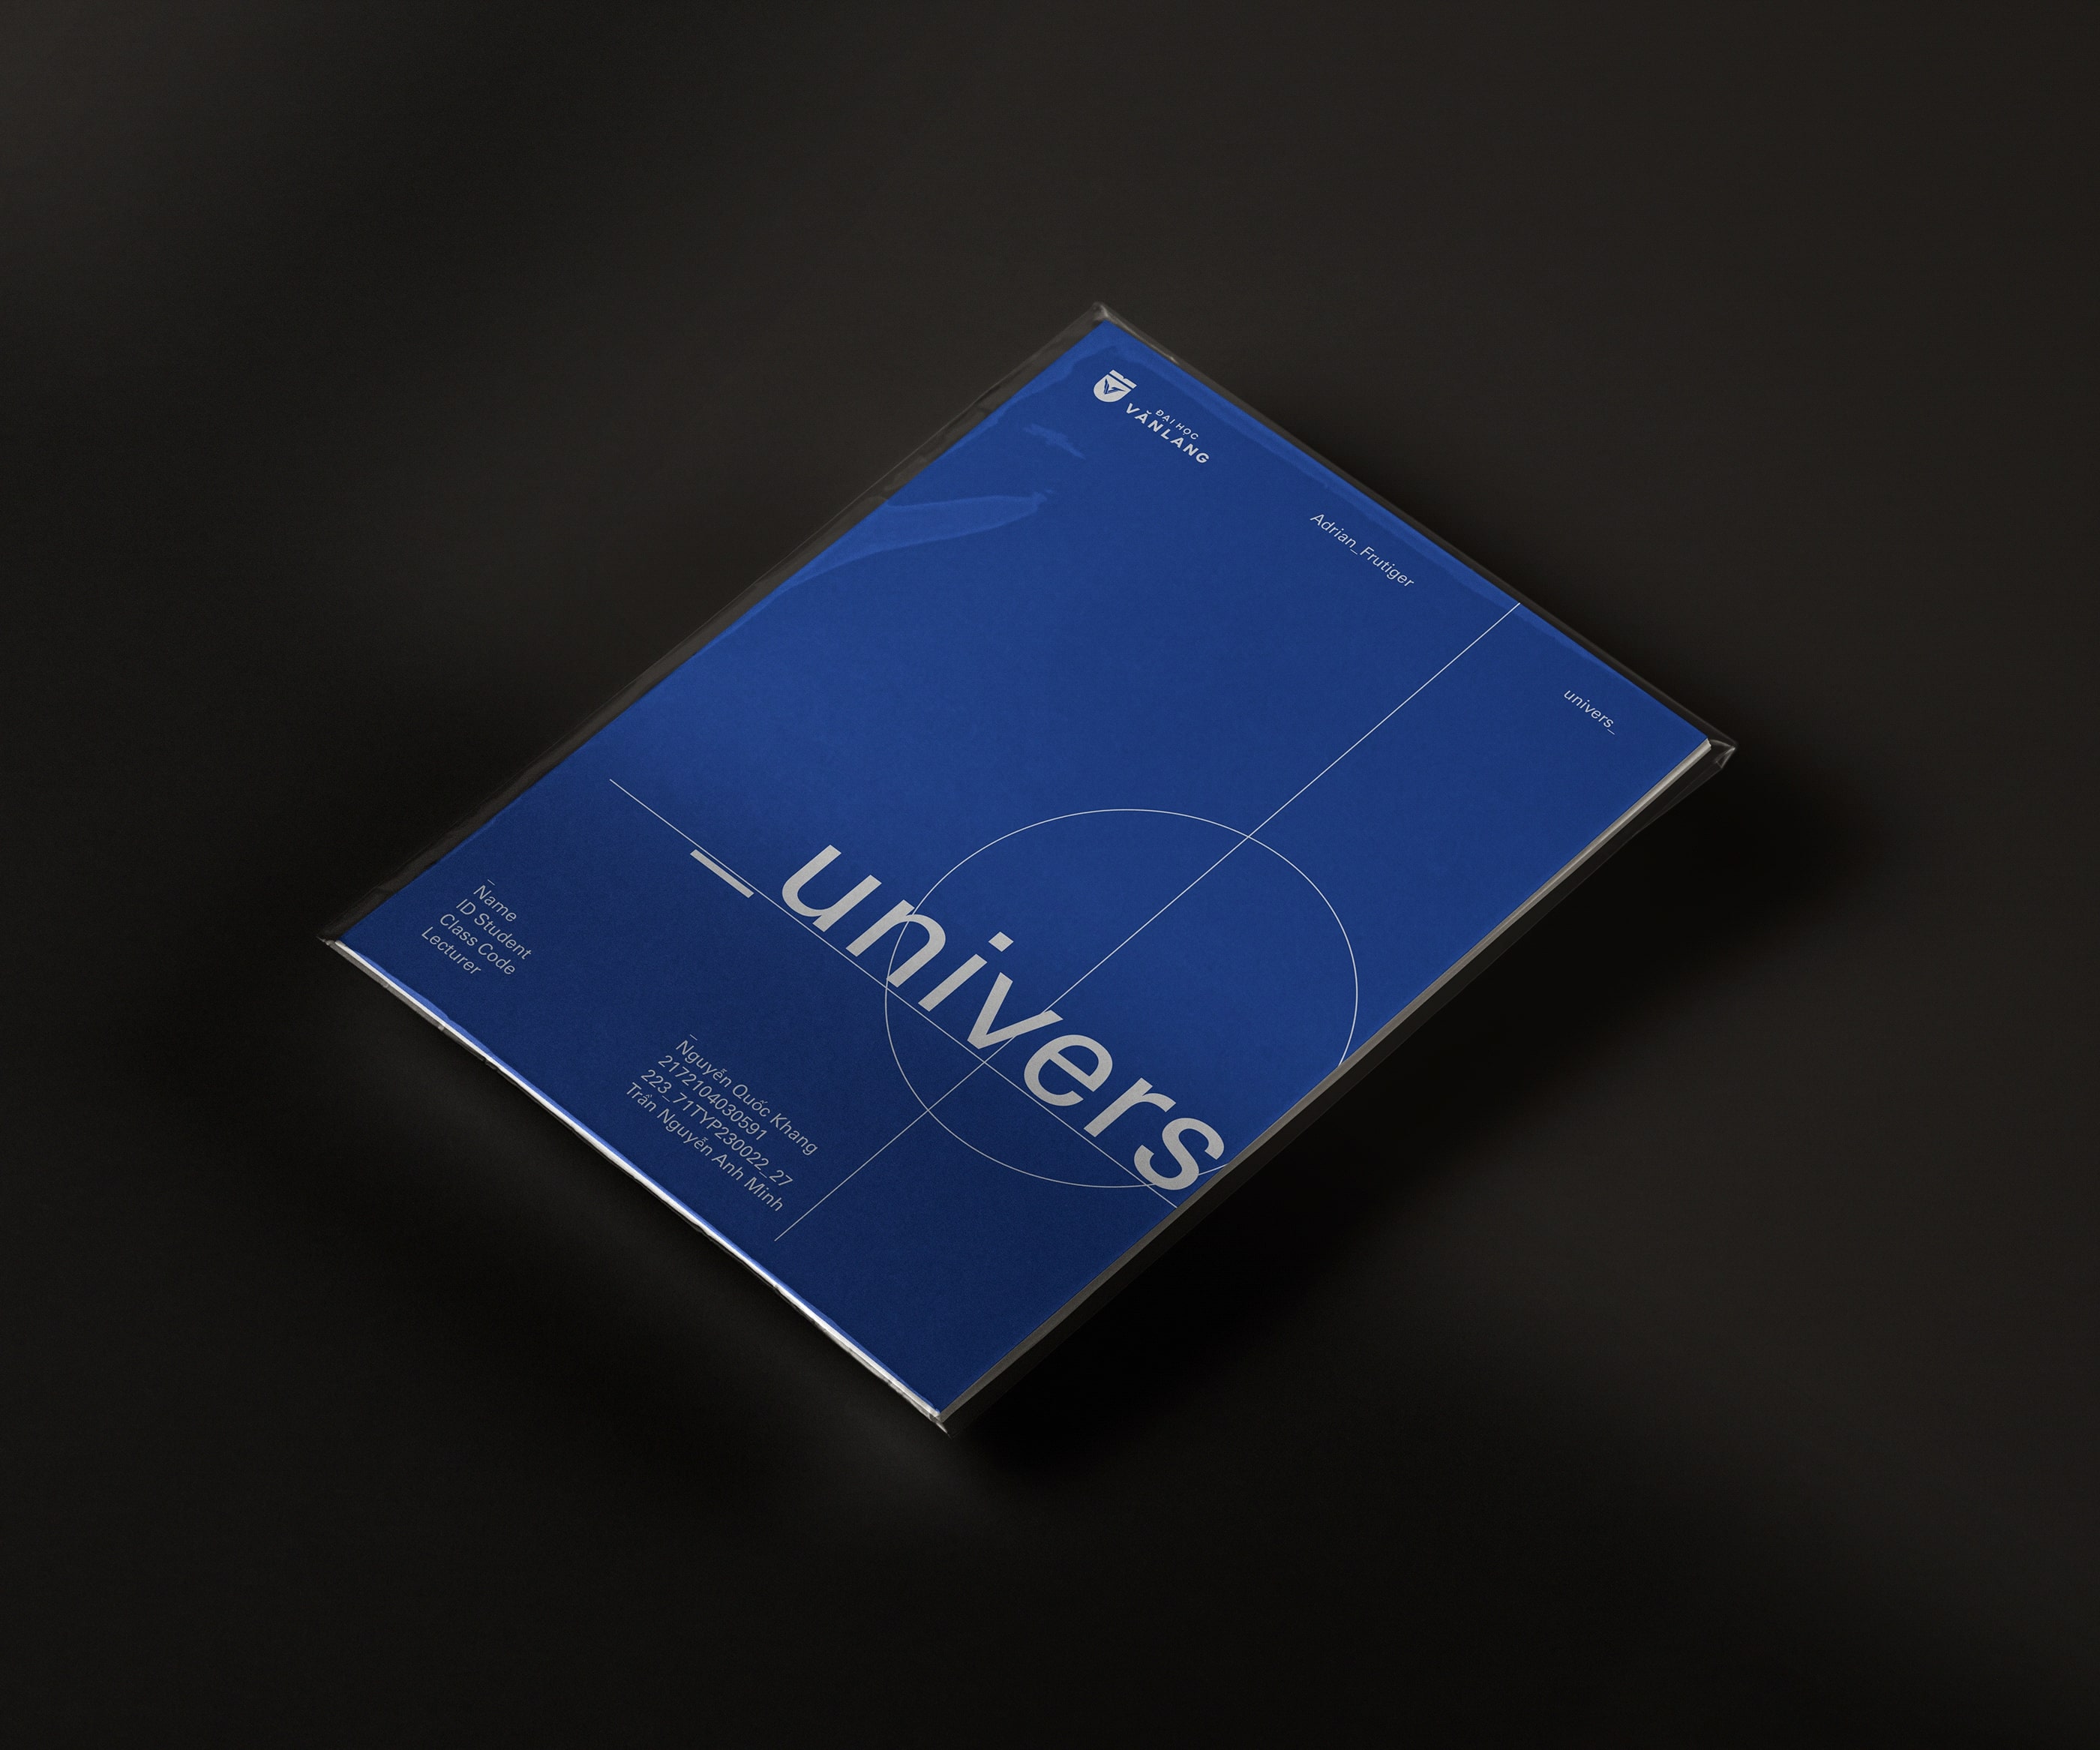 _Univers Typography Catalogue Student Project by Kayn Nguyen